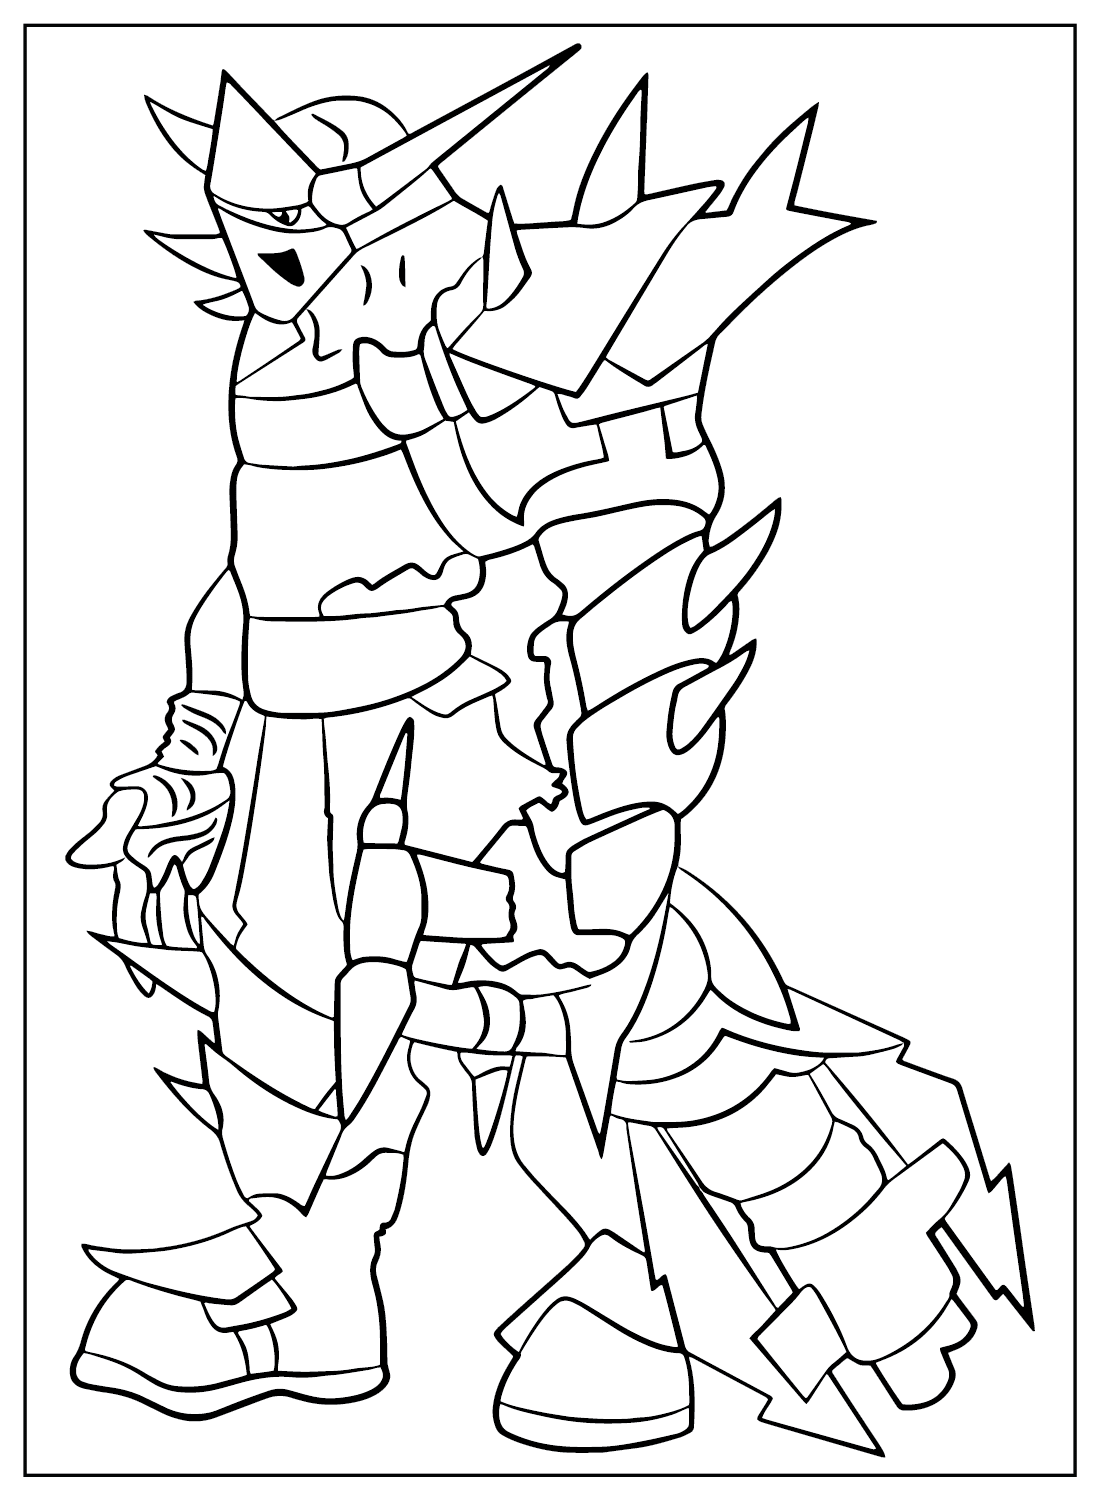 Marauders Coloring Page from Jak and Daxter